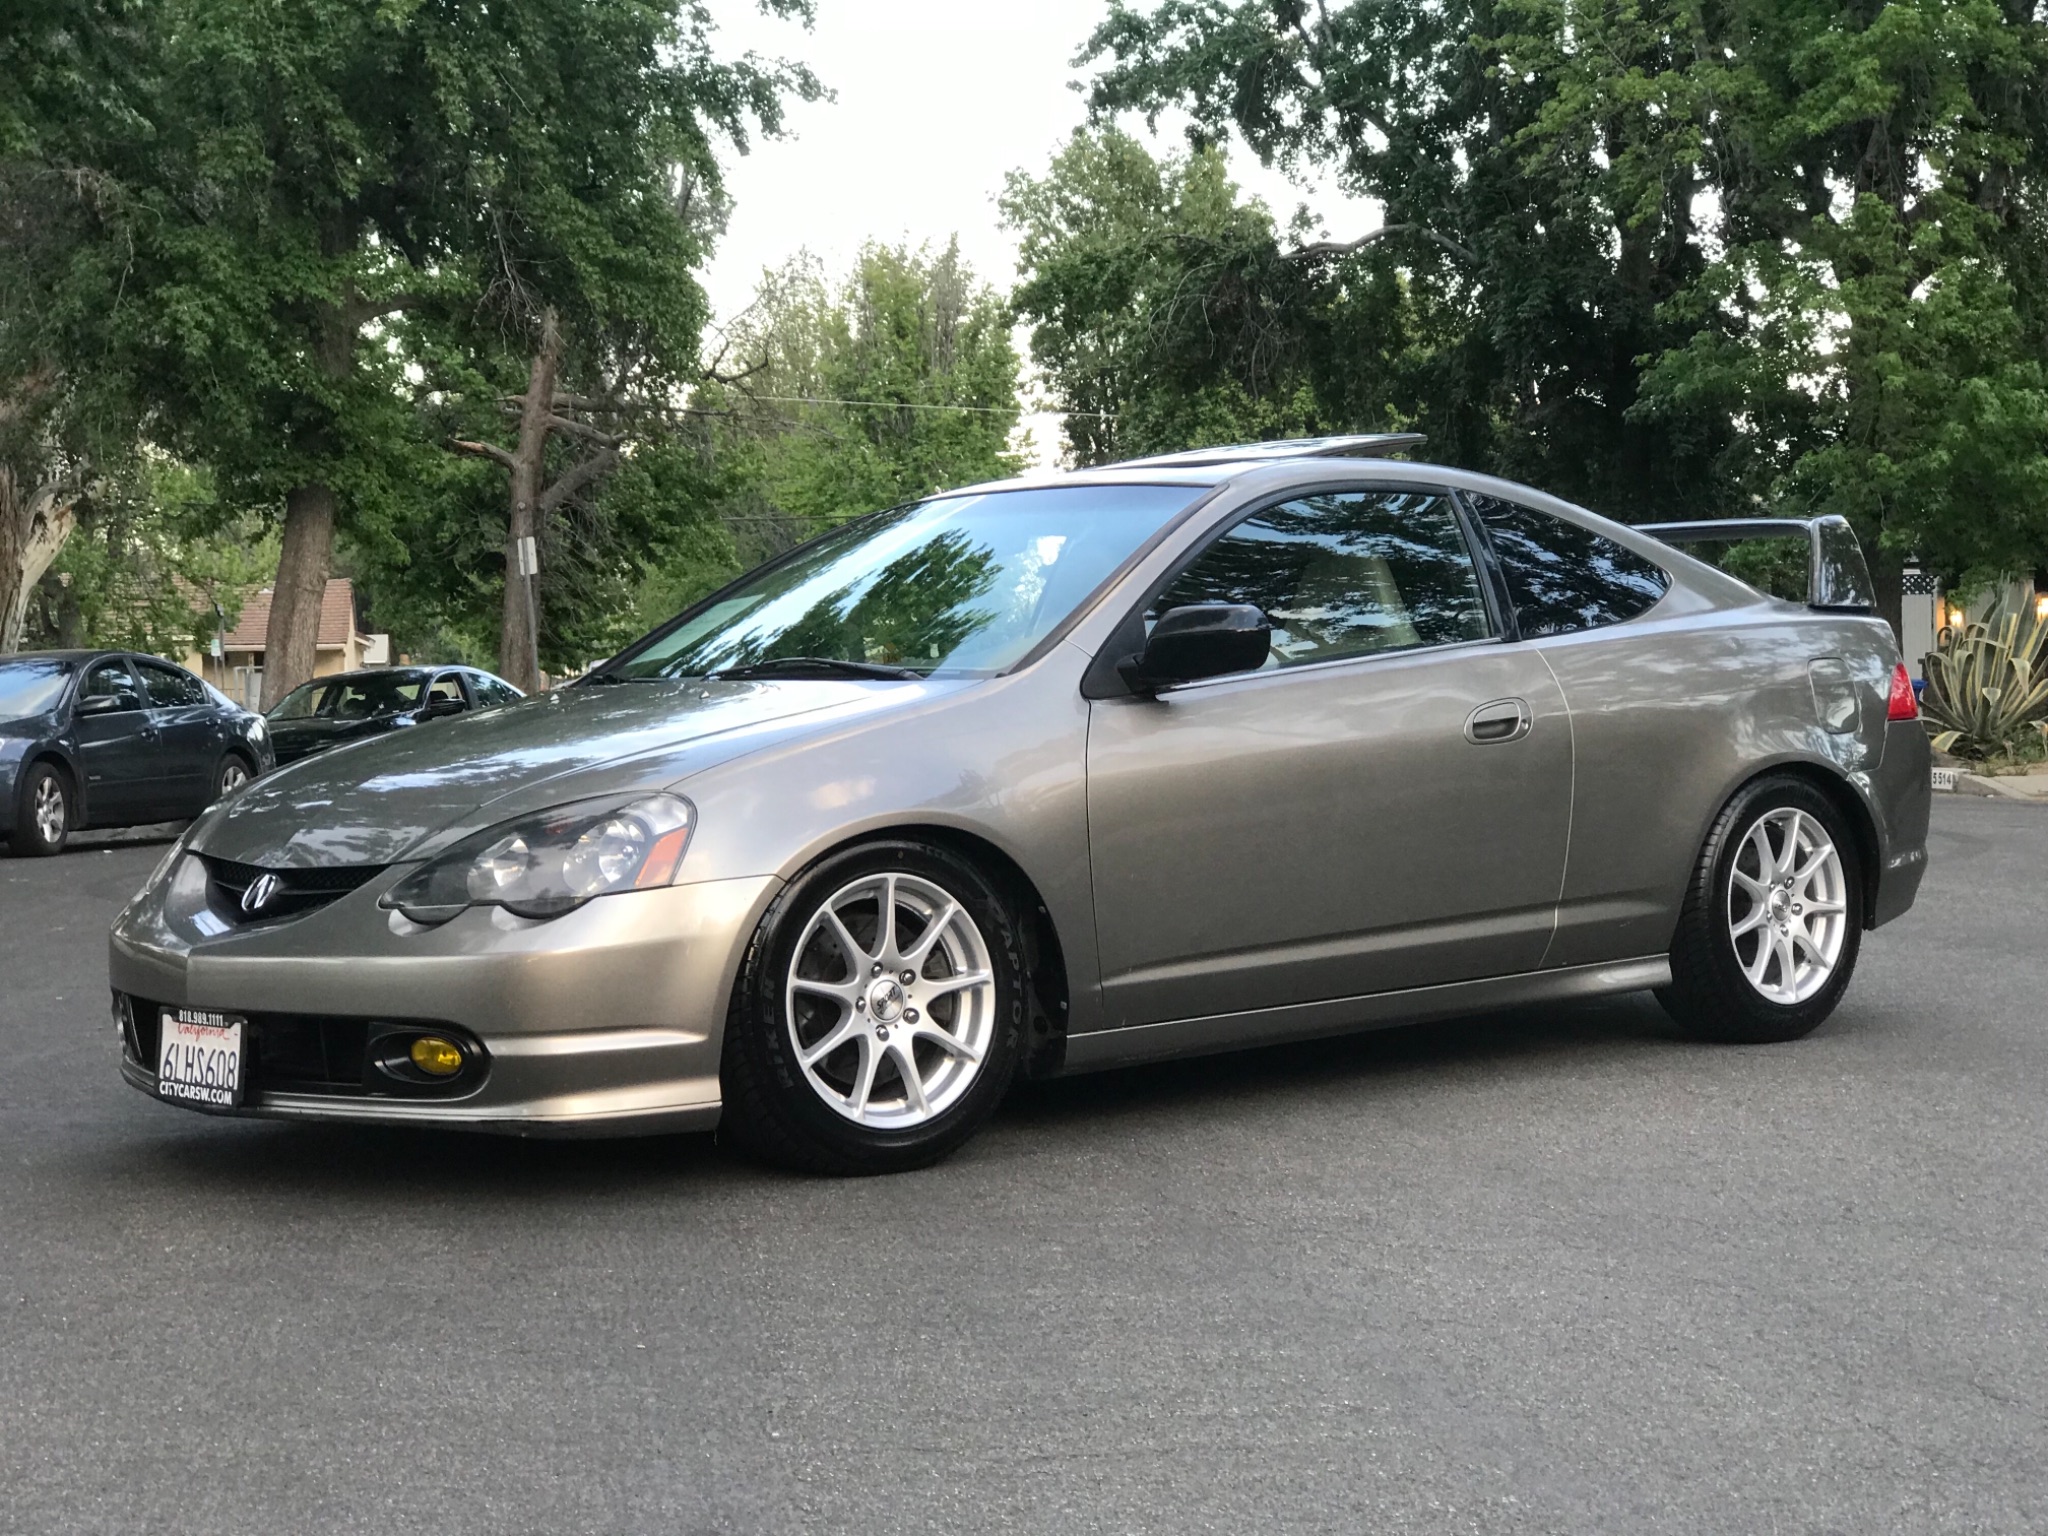 Used 04 Acura Rsx Type S At City Cars Warehouse Inc